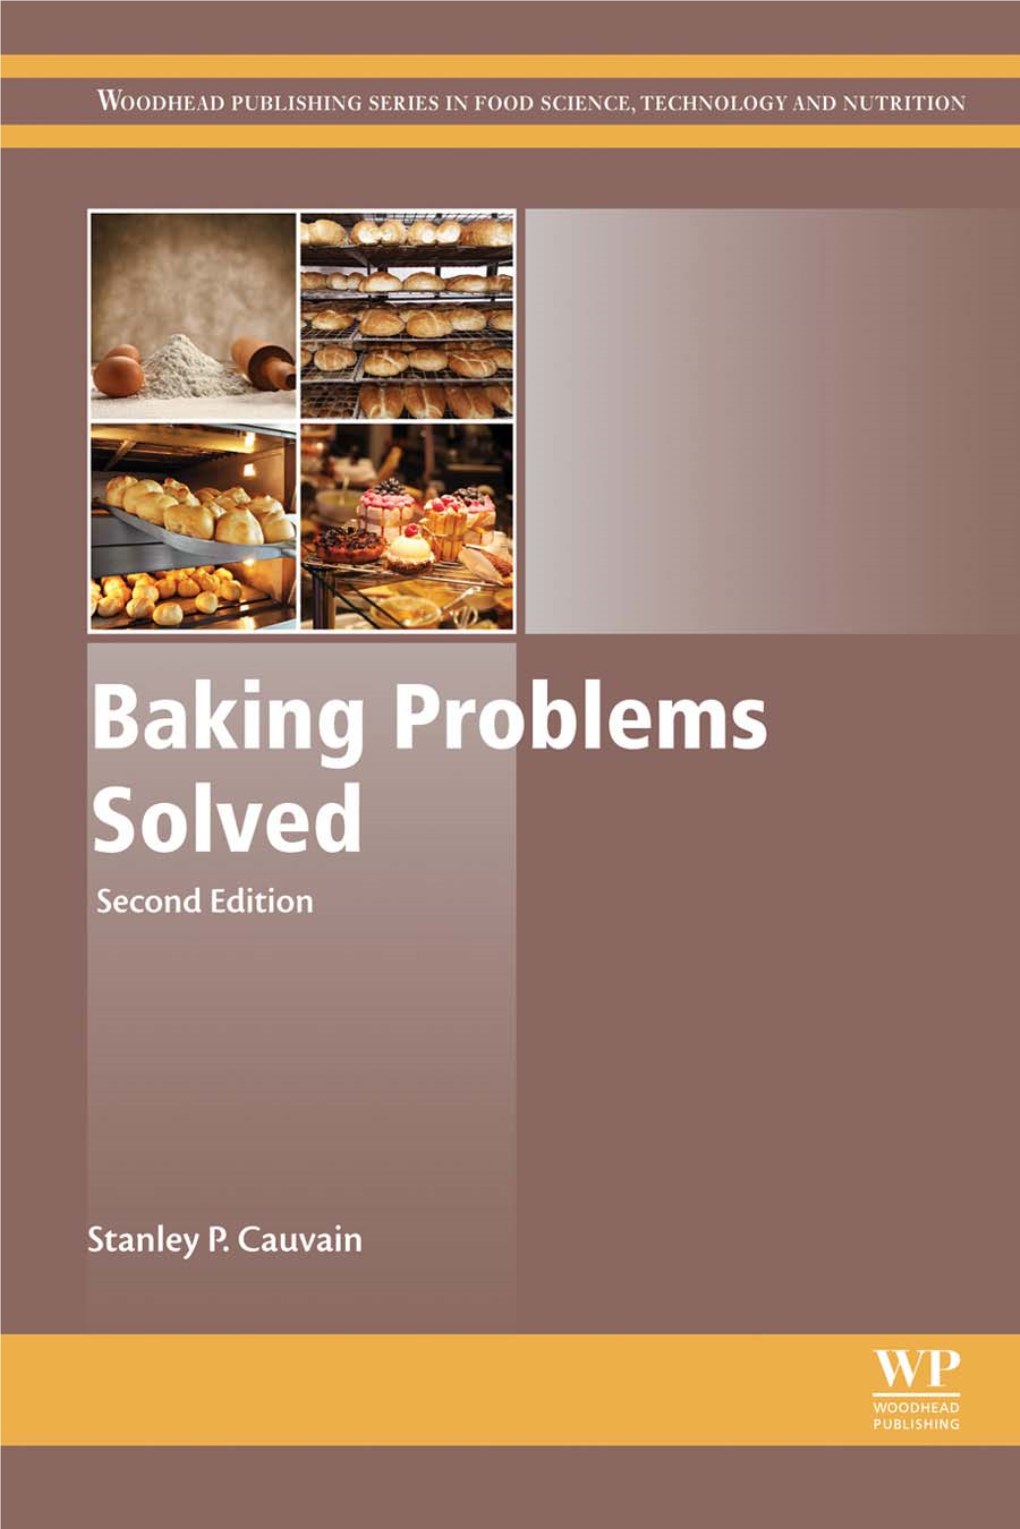 Baking Problems Solved Related Titles